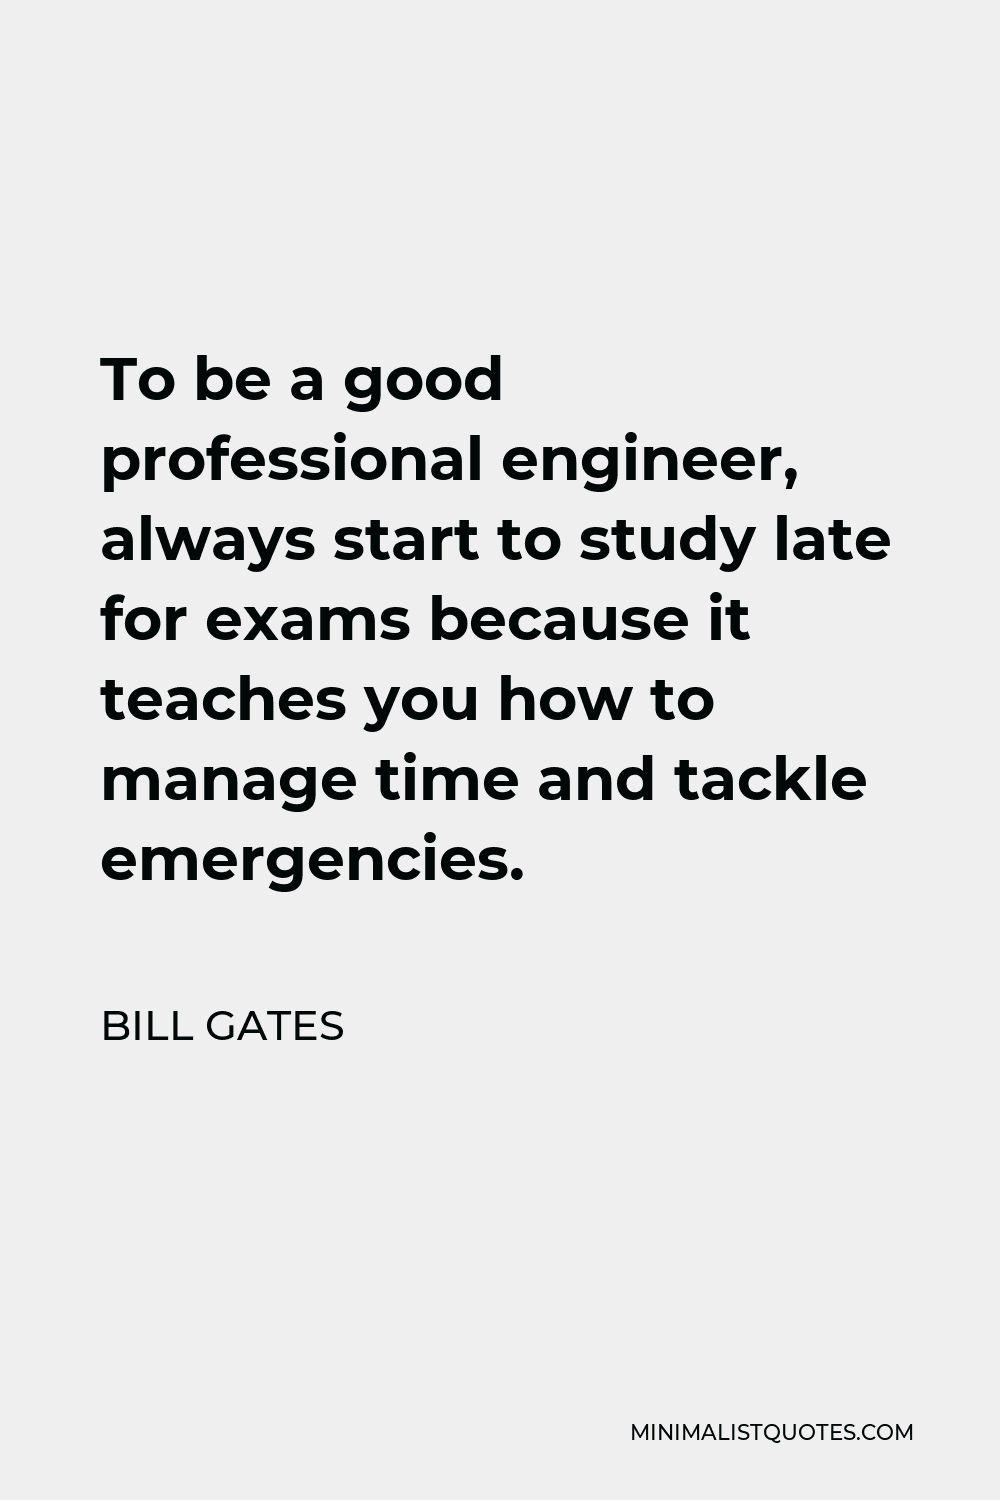 Bill Gates Quote - To be a good professional engineer, always start to study late for exams because it teaches you how to manage time and tackle emergencies.